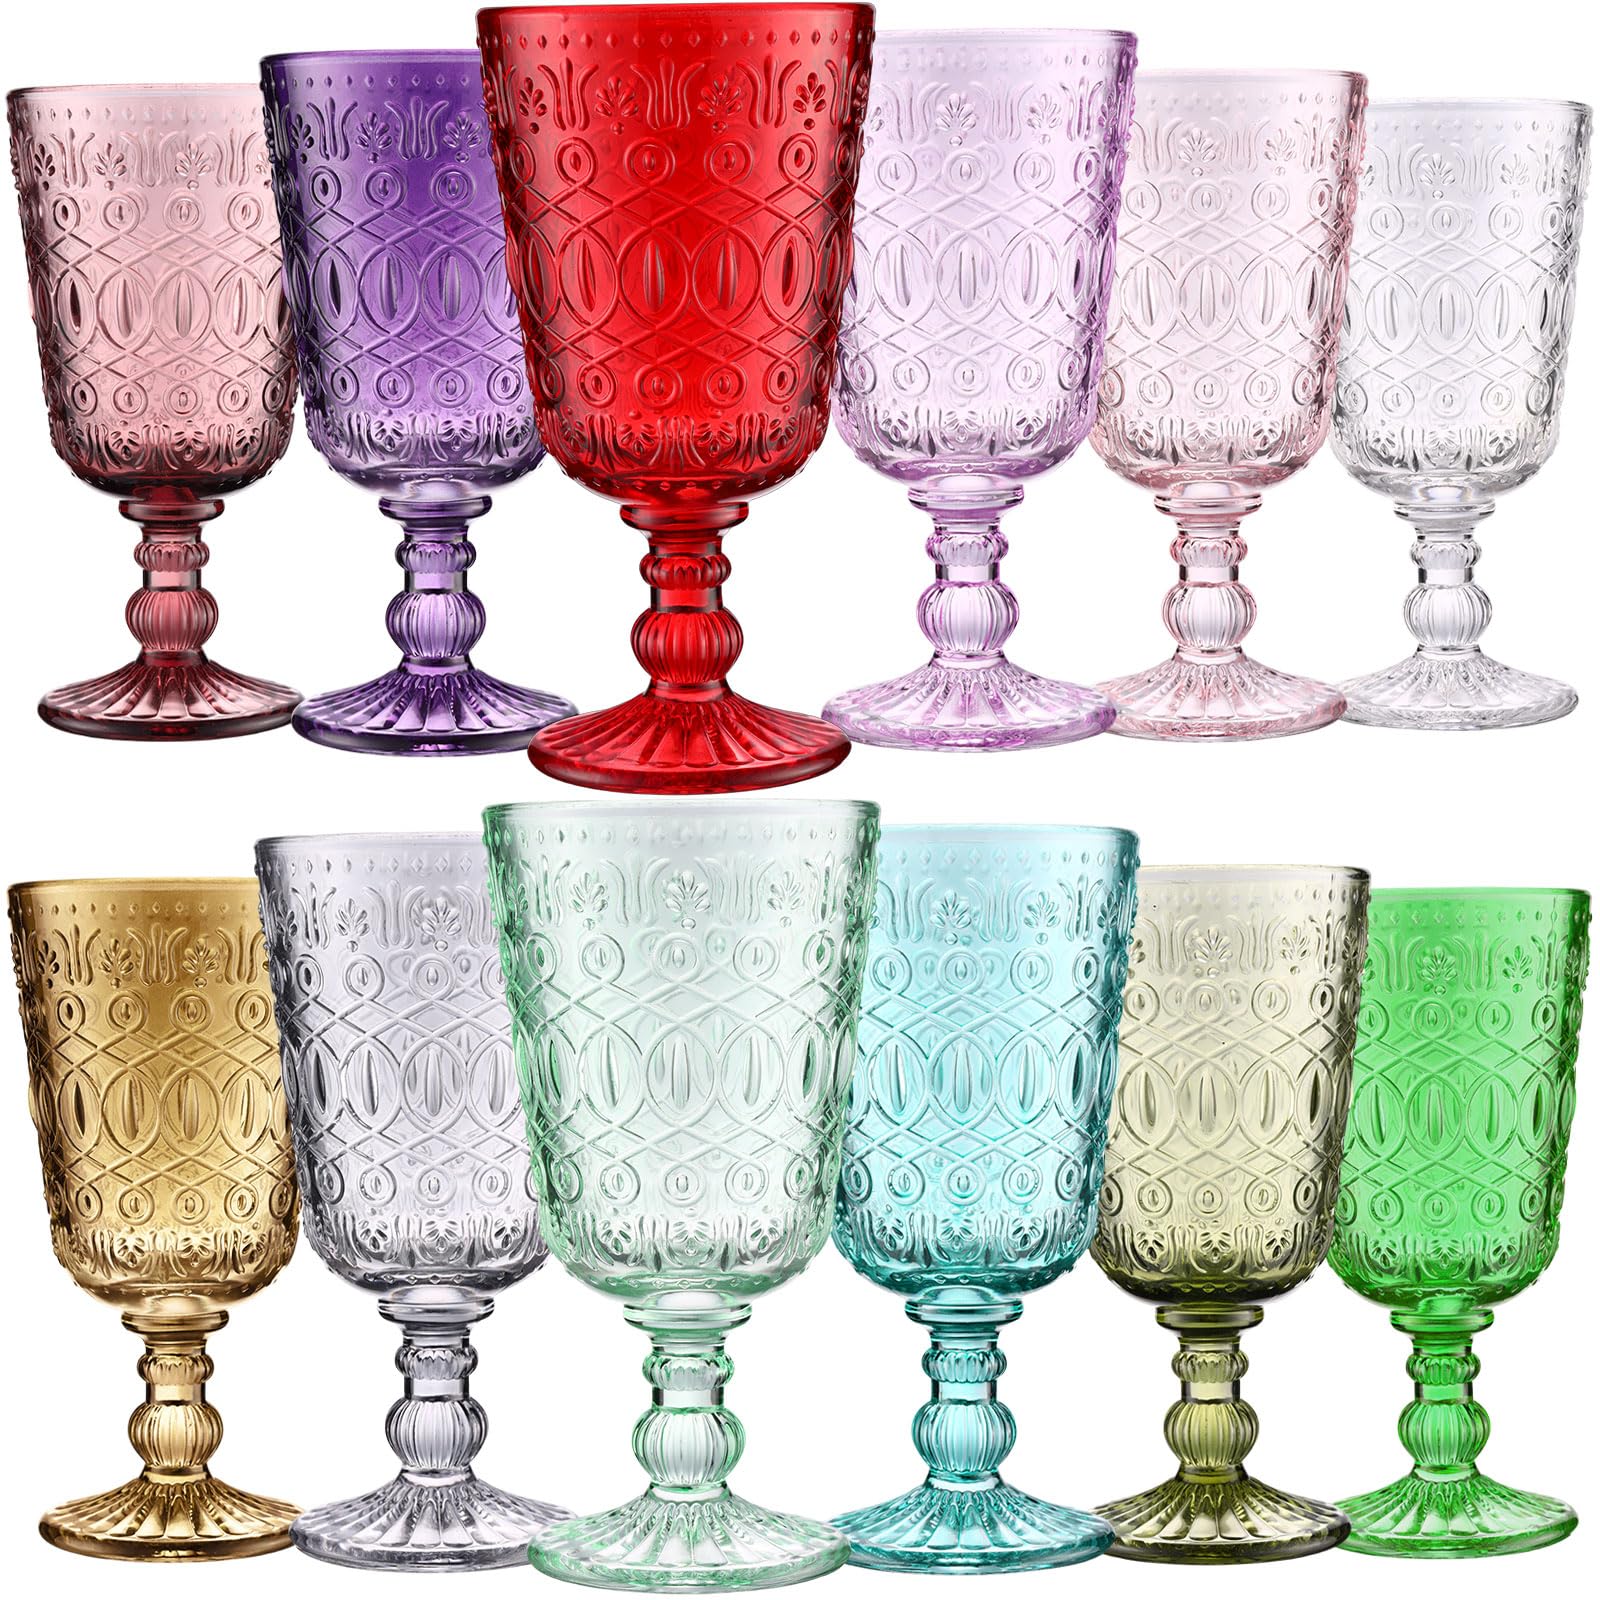 12 Pcs Wine Glass Goblets Colored Glass Goblets Bulk 9 oz Stemmed Glassware Vintage Pattern Embossed High Clear Drinking Glass with Stem Diamond Design for Wedding Party Banquet Feast, 12 Colors